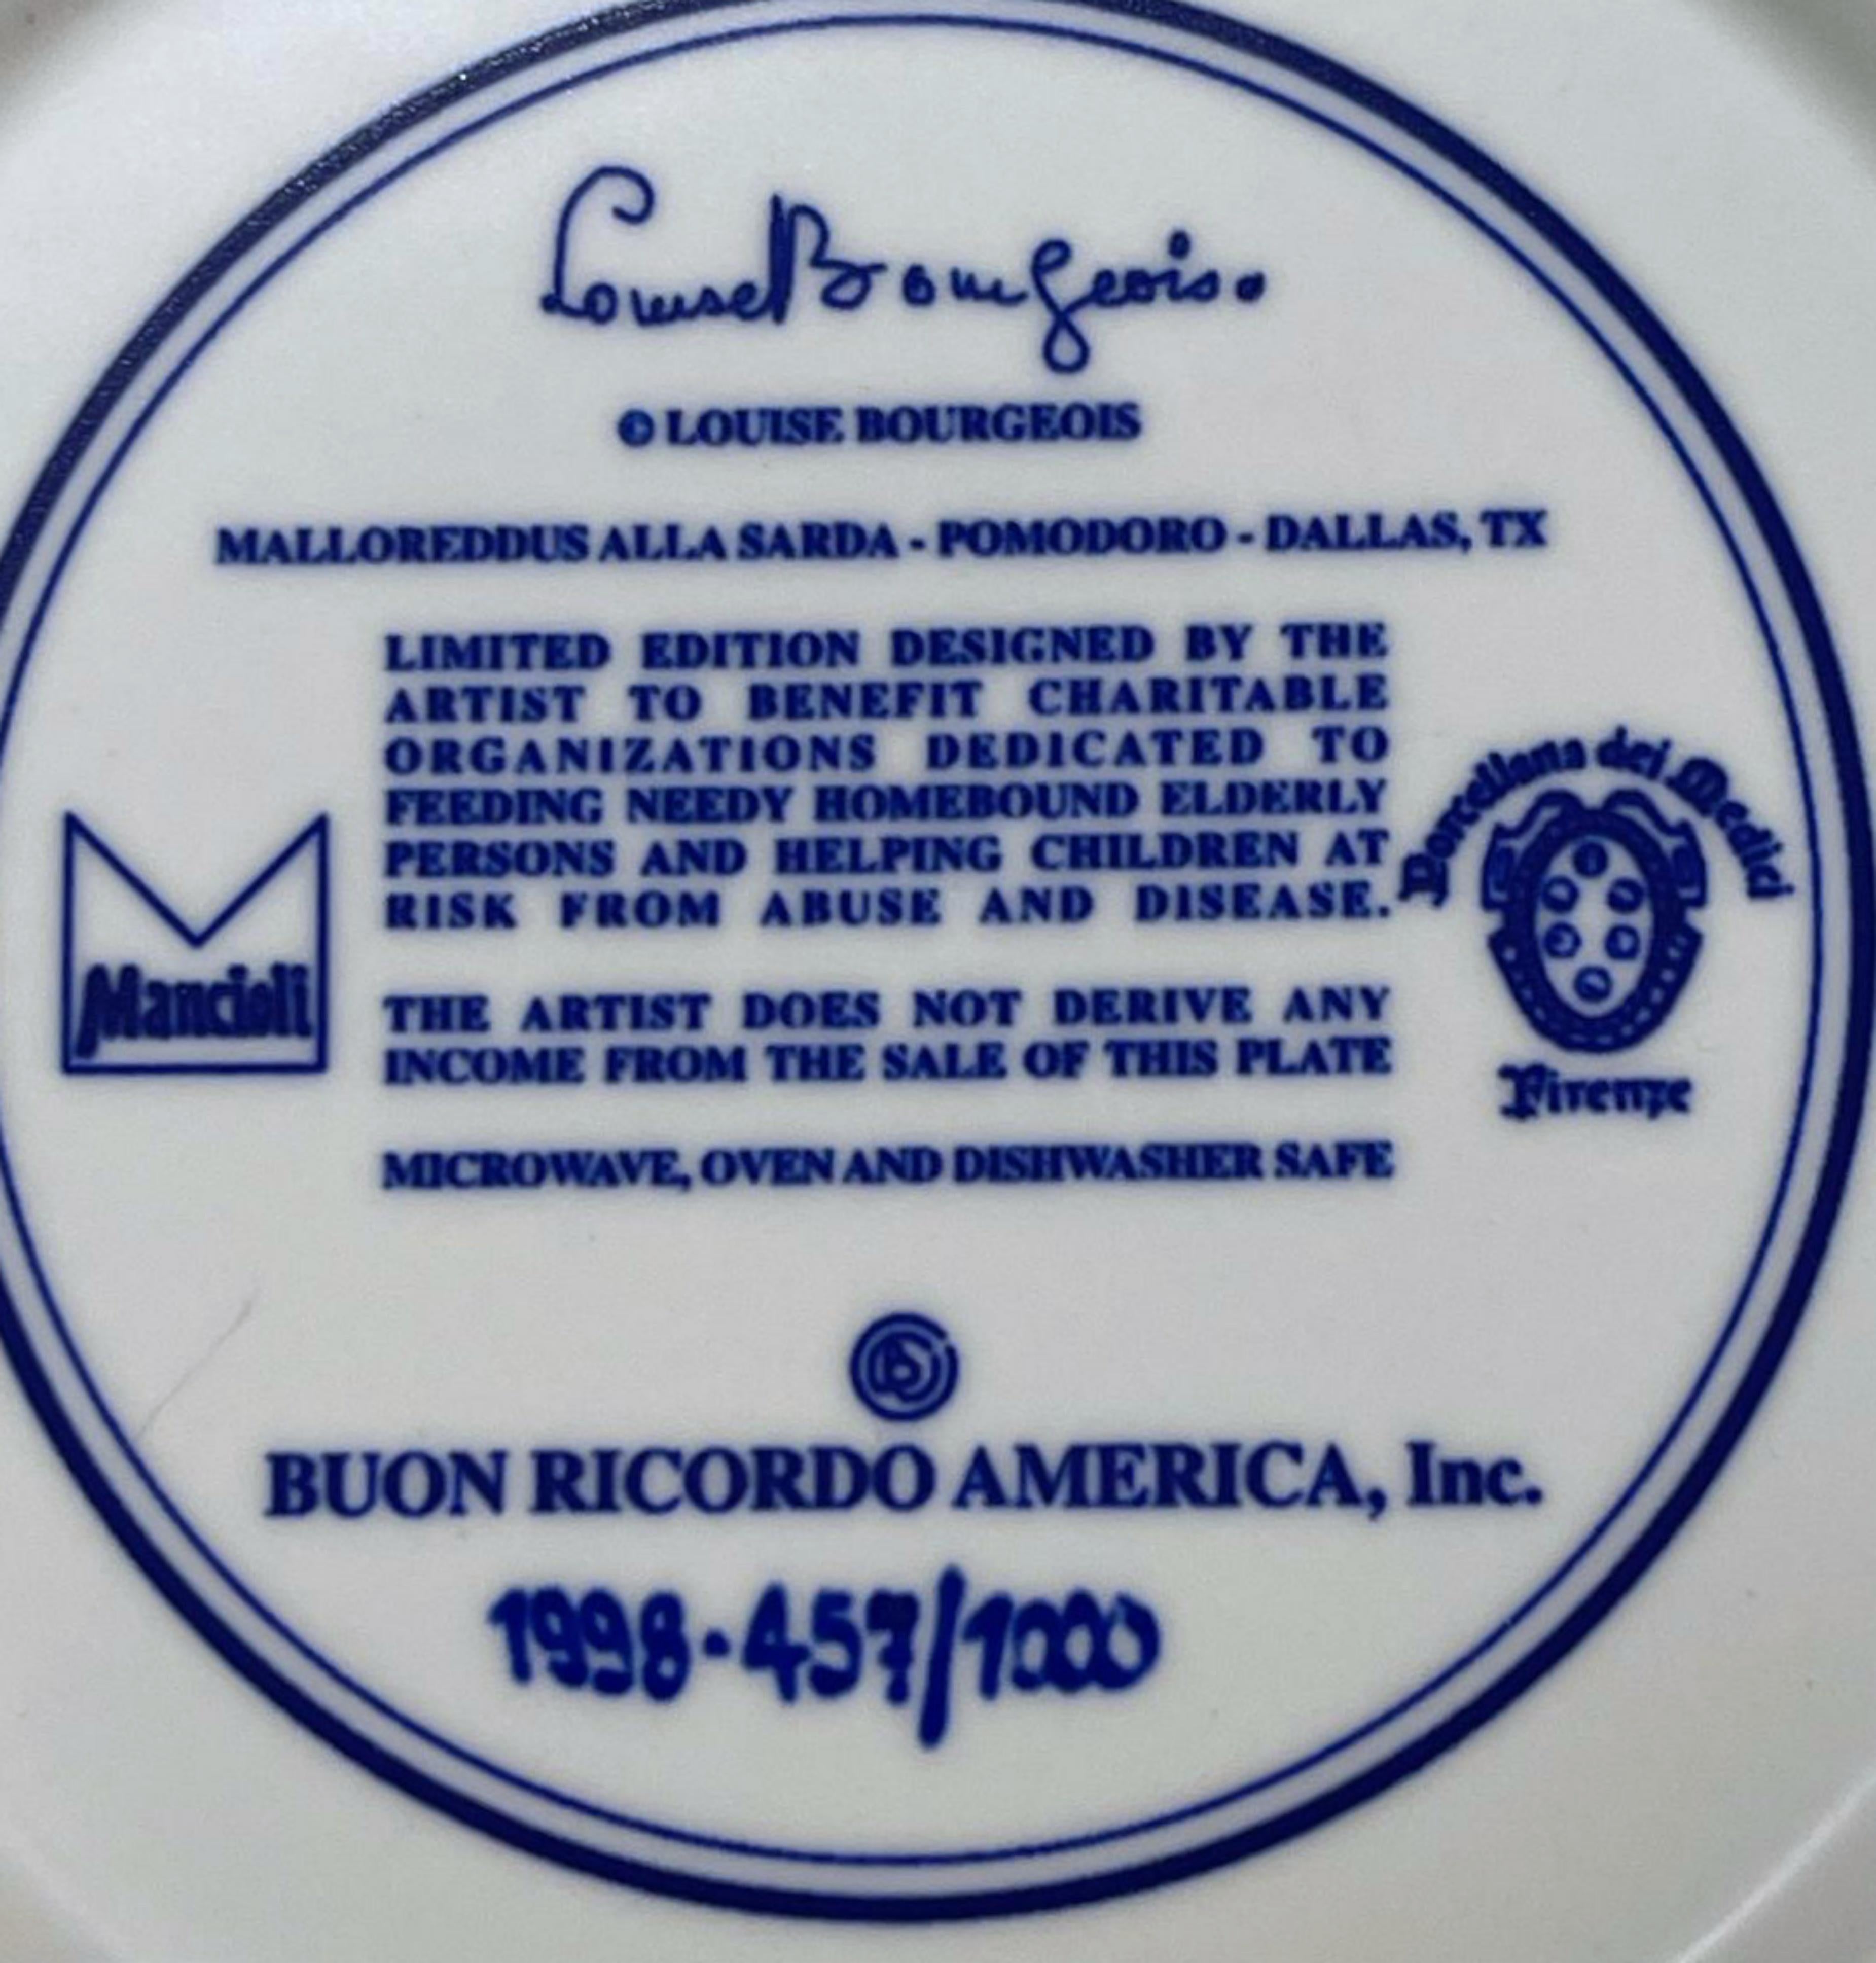 Limited Edition numbered Italian Blue Ceramic Plate for Dallas Texas restaurant  - Sculpture by Louise Bourgeois